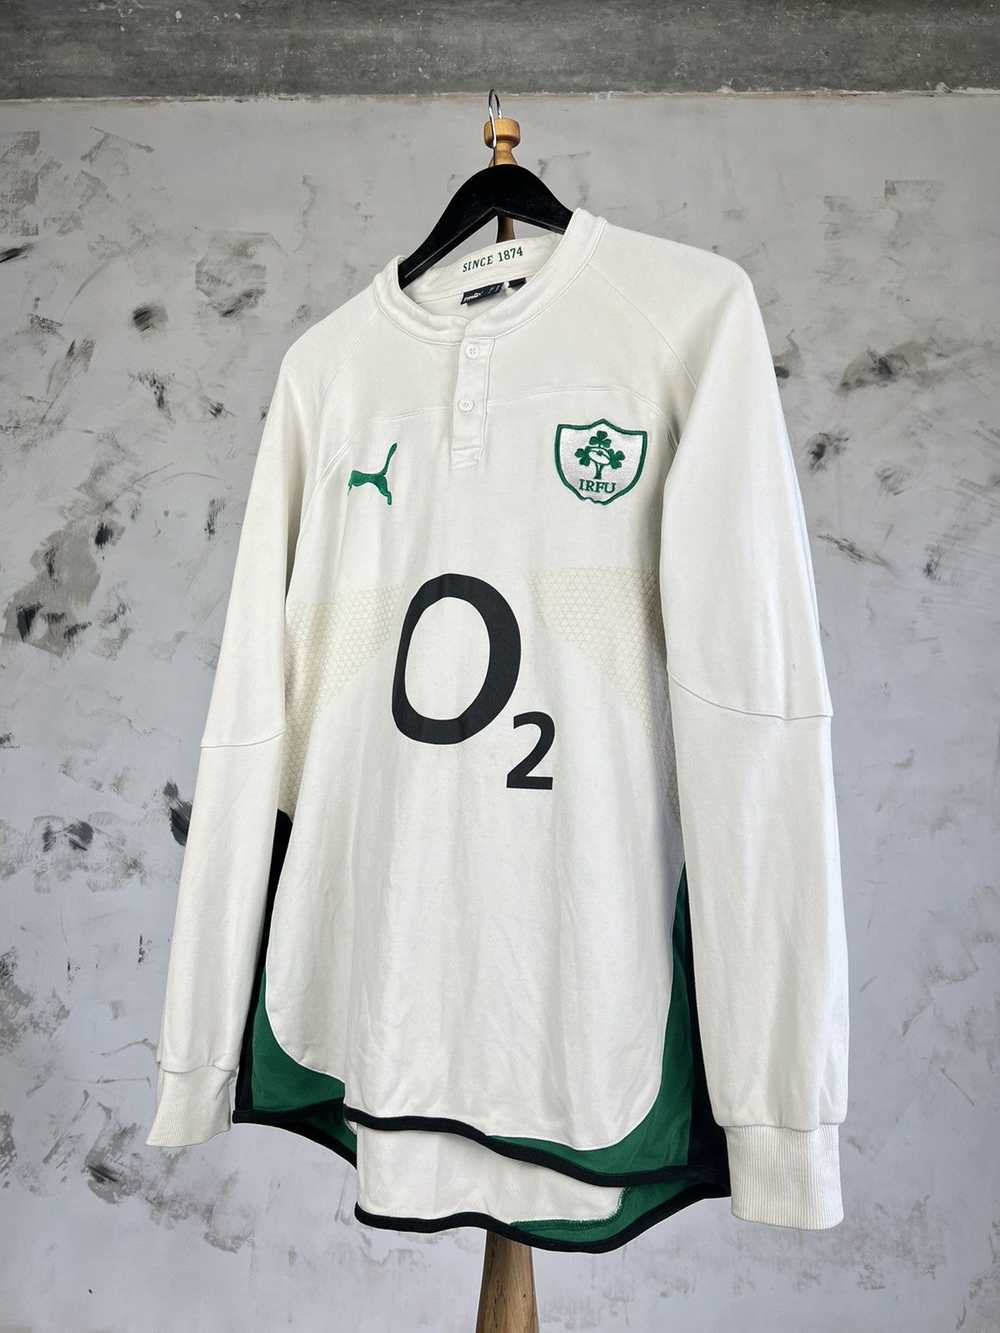 Jersey × Puma × Vintage Ireland National Rugby Te… - image 1